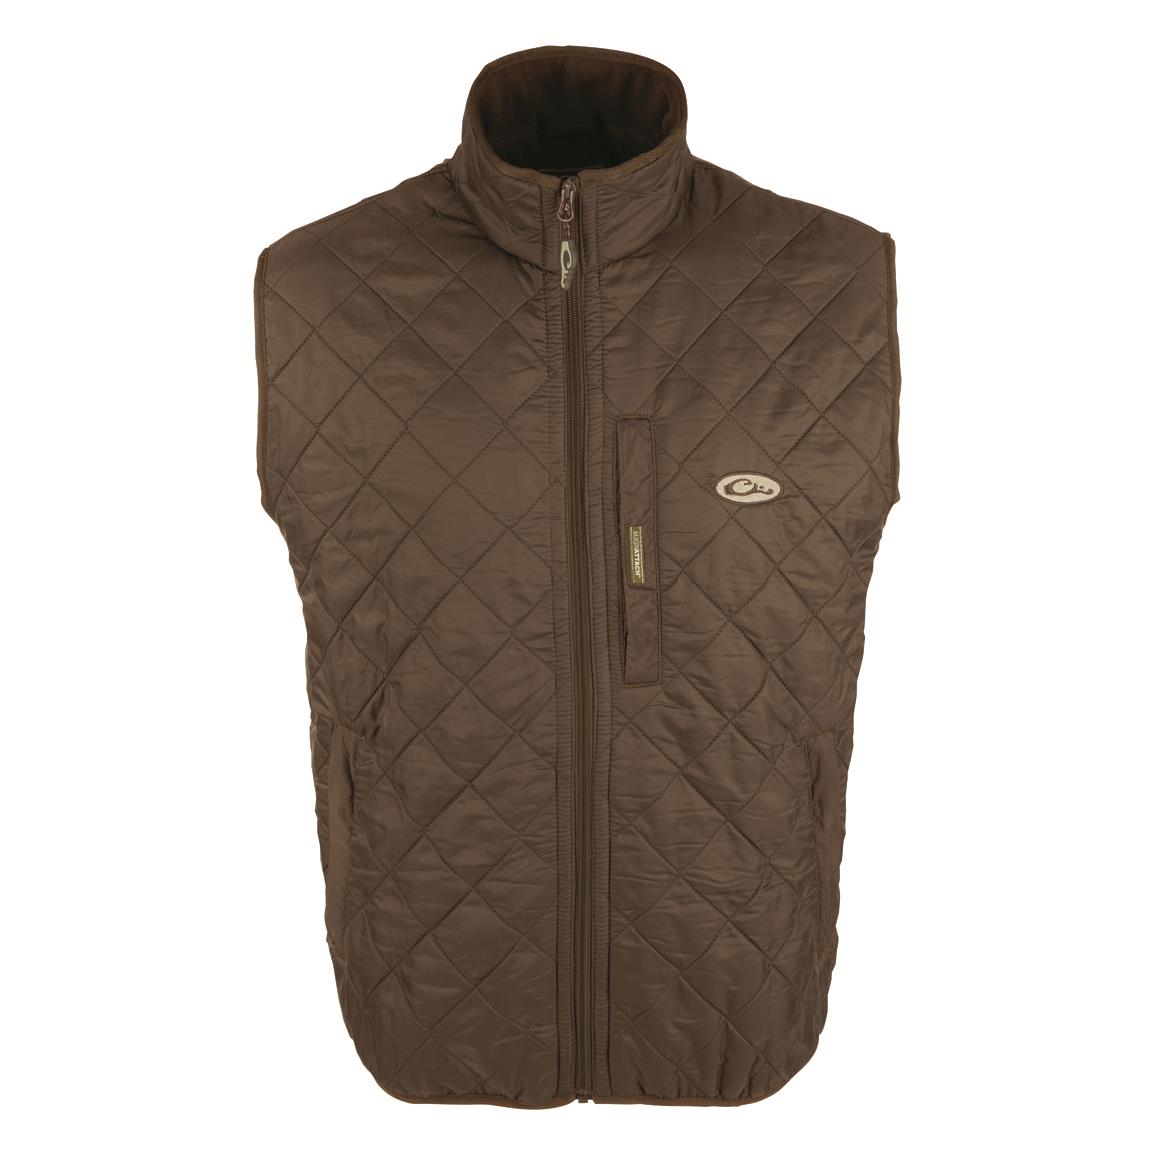 Drake Clothing Company Men's Delta Fleece-lined Quilted Vest, Dark Earth